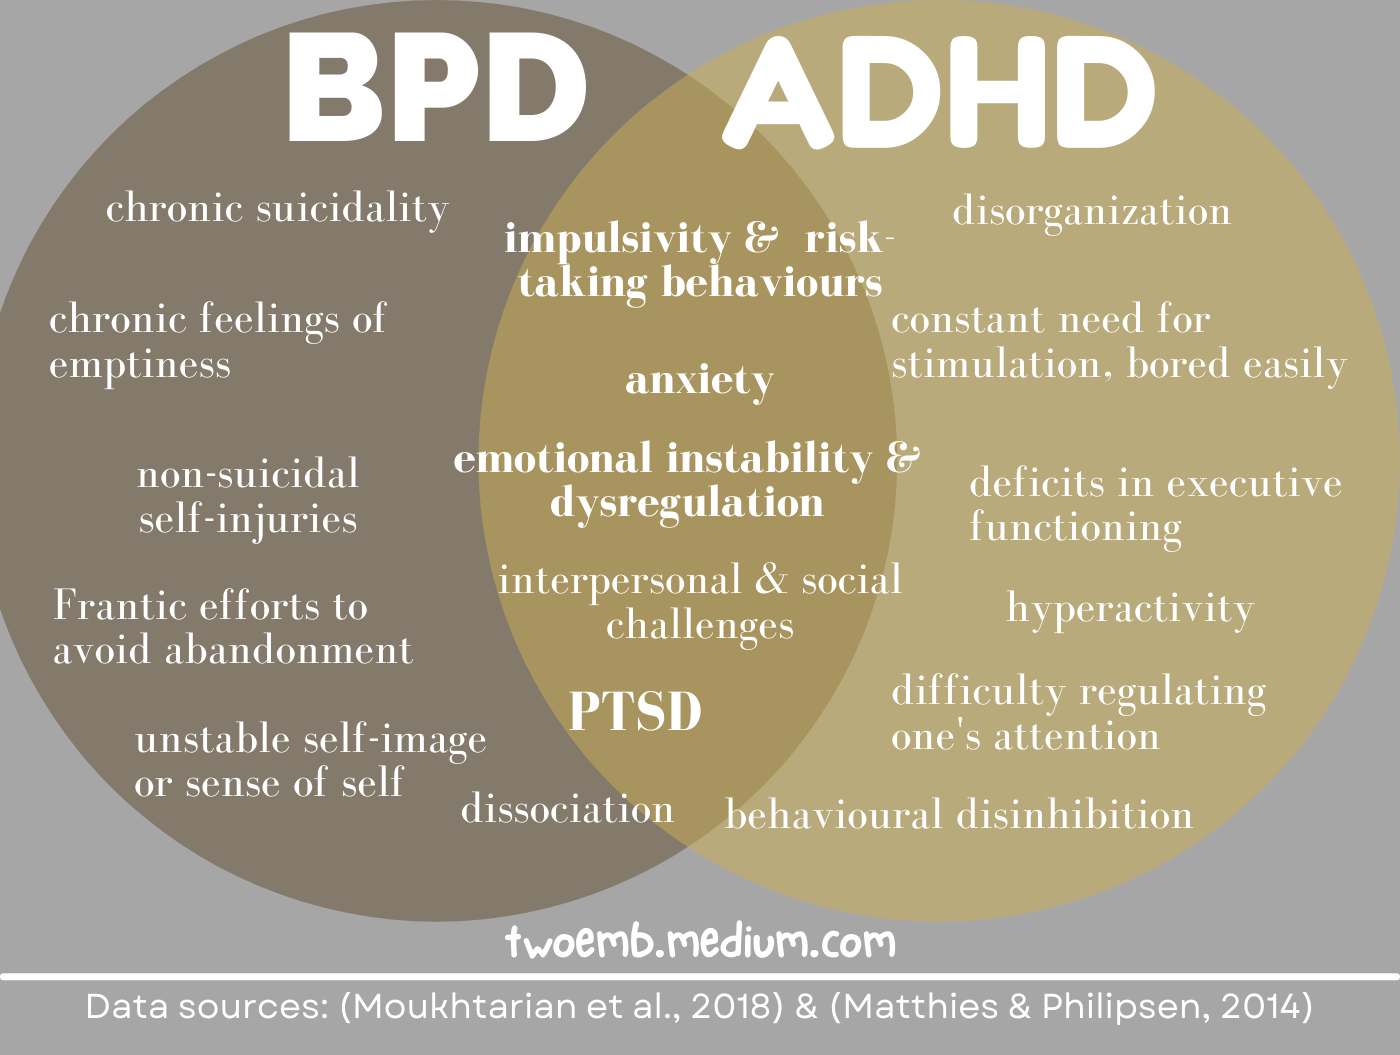 dating someone with bpd and adhd